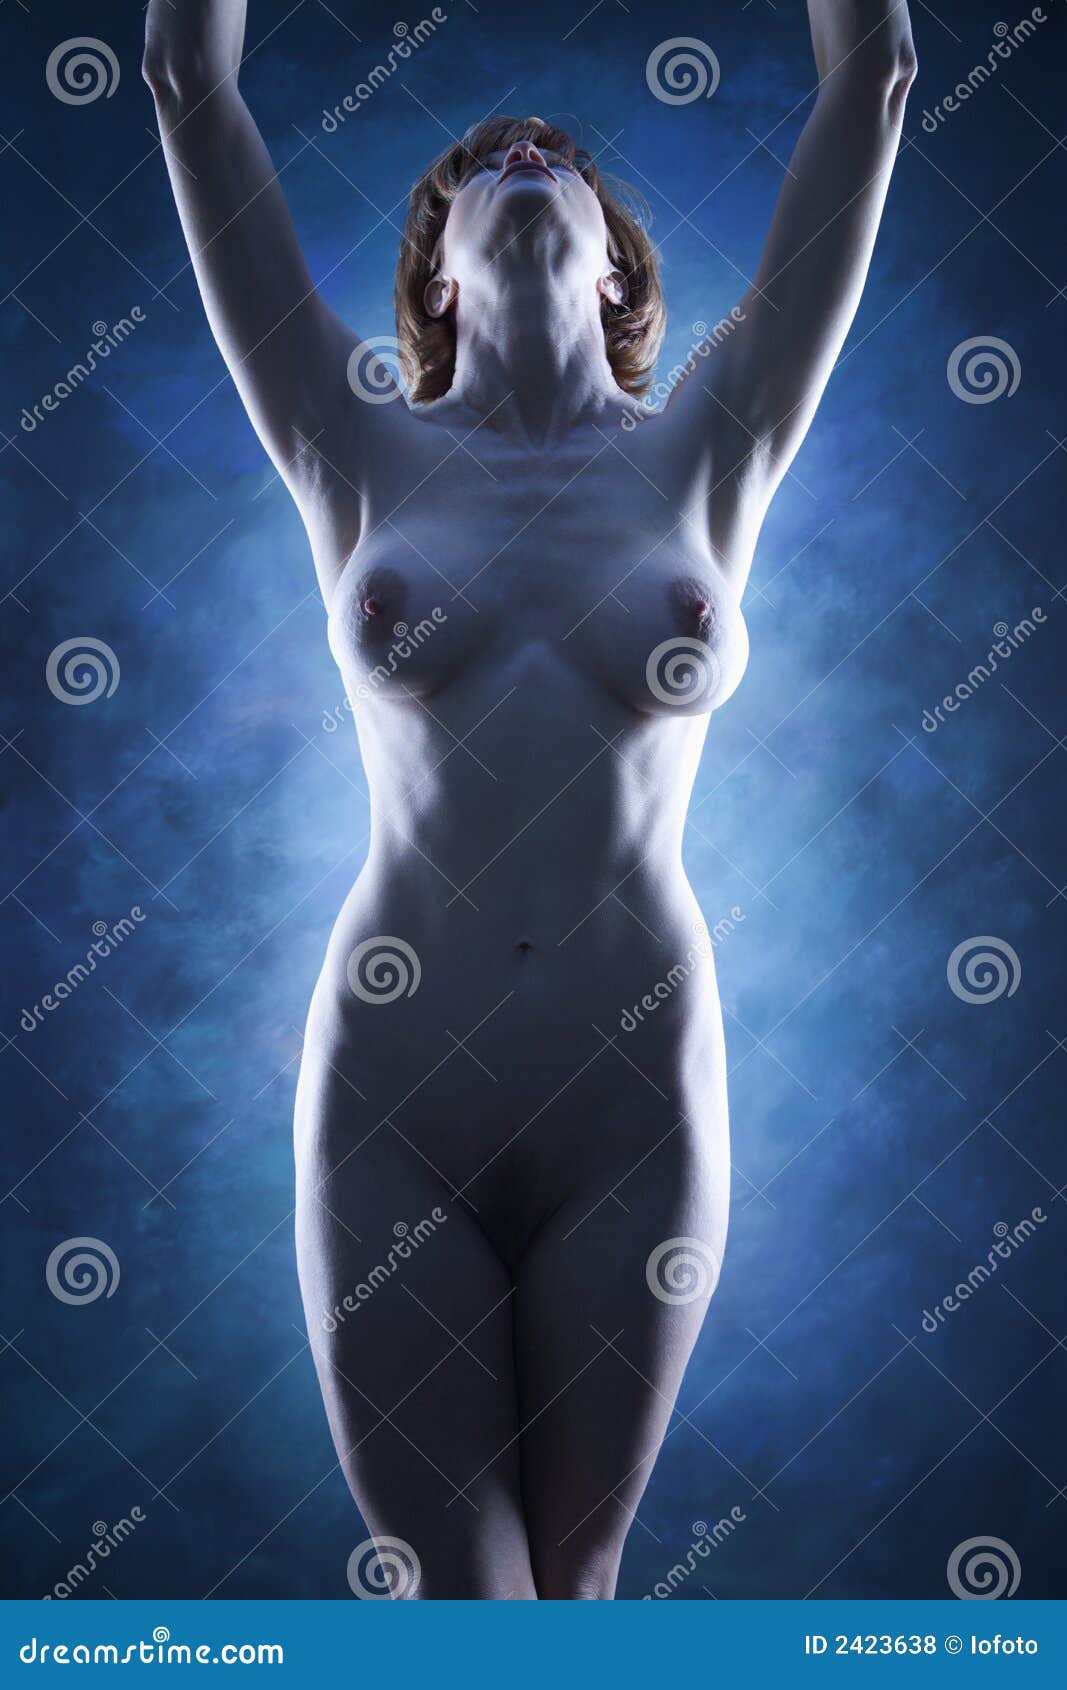 Women with naked arms